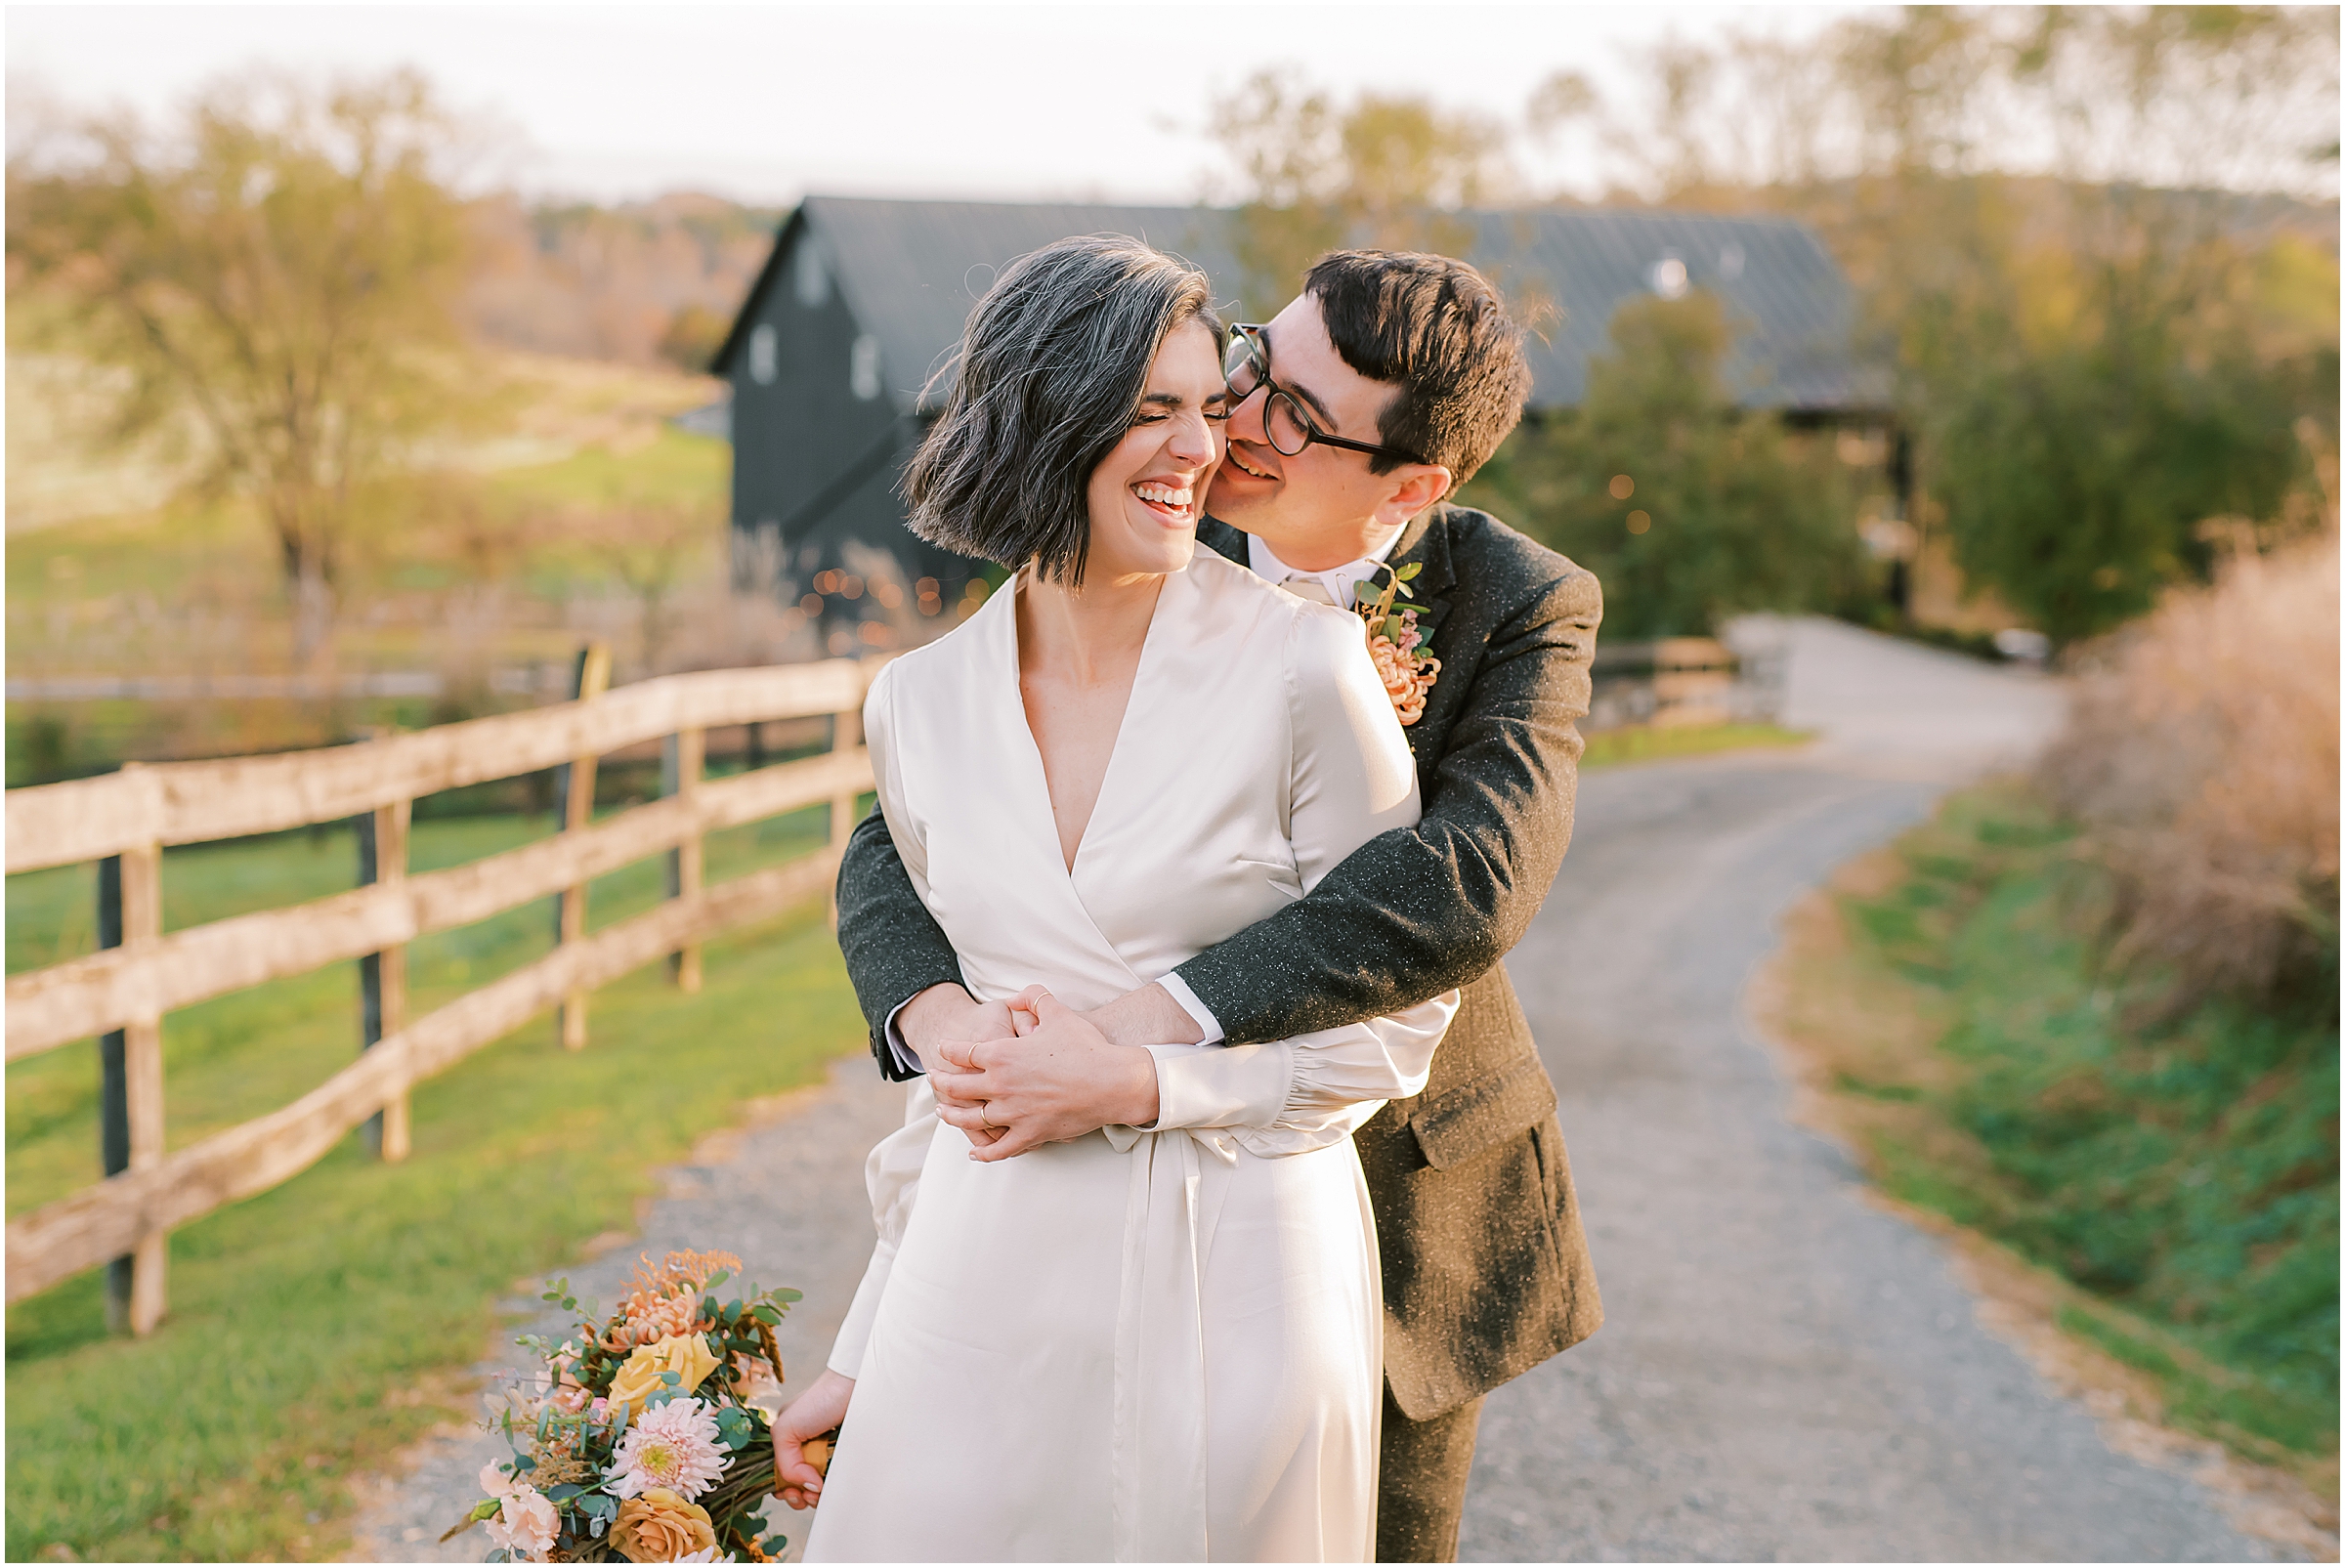 Winter market themed wedding in Purcellville